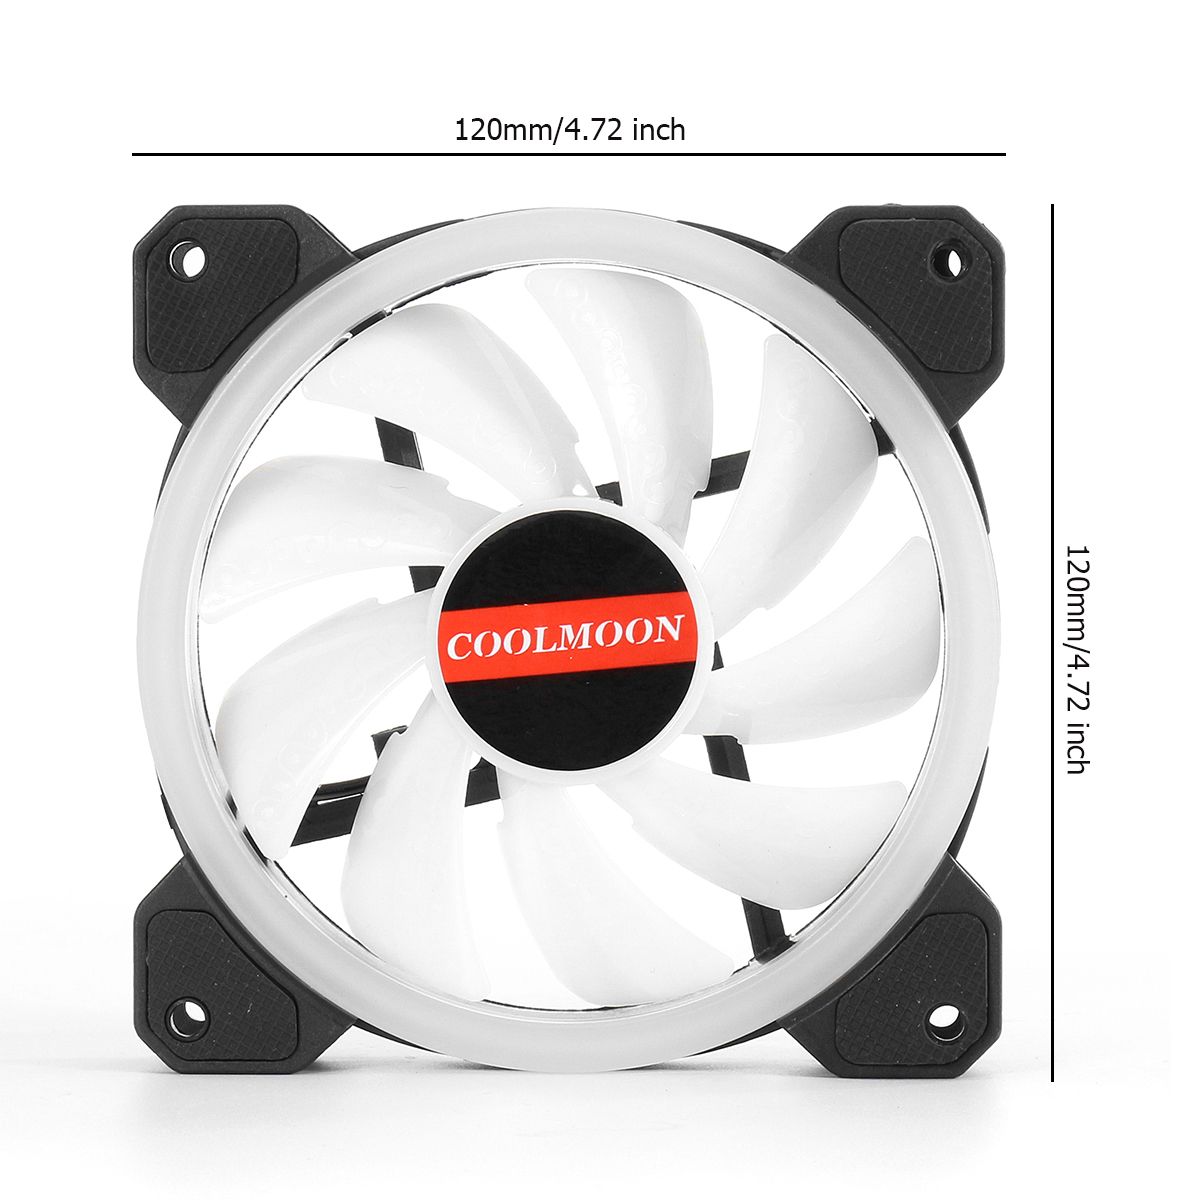 RGB-Air-Cooling-Fan-12cm-Desktop-Computer-Chassis-Cooling-Fan-Colorful-Color-Changing-Aurora-Solar-E-1634029